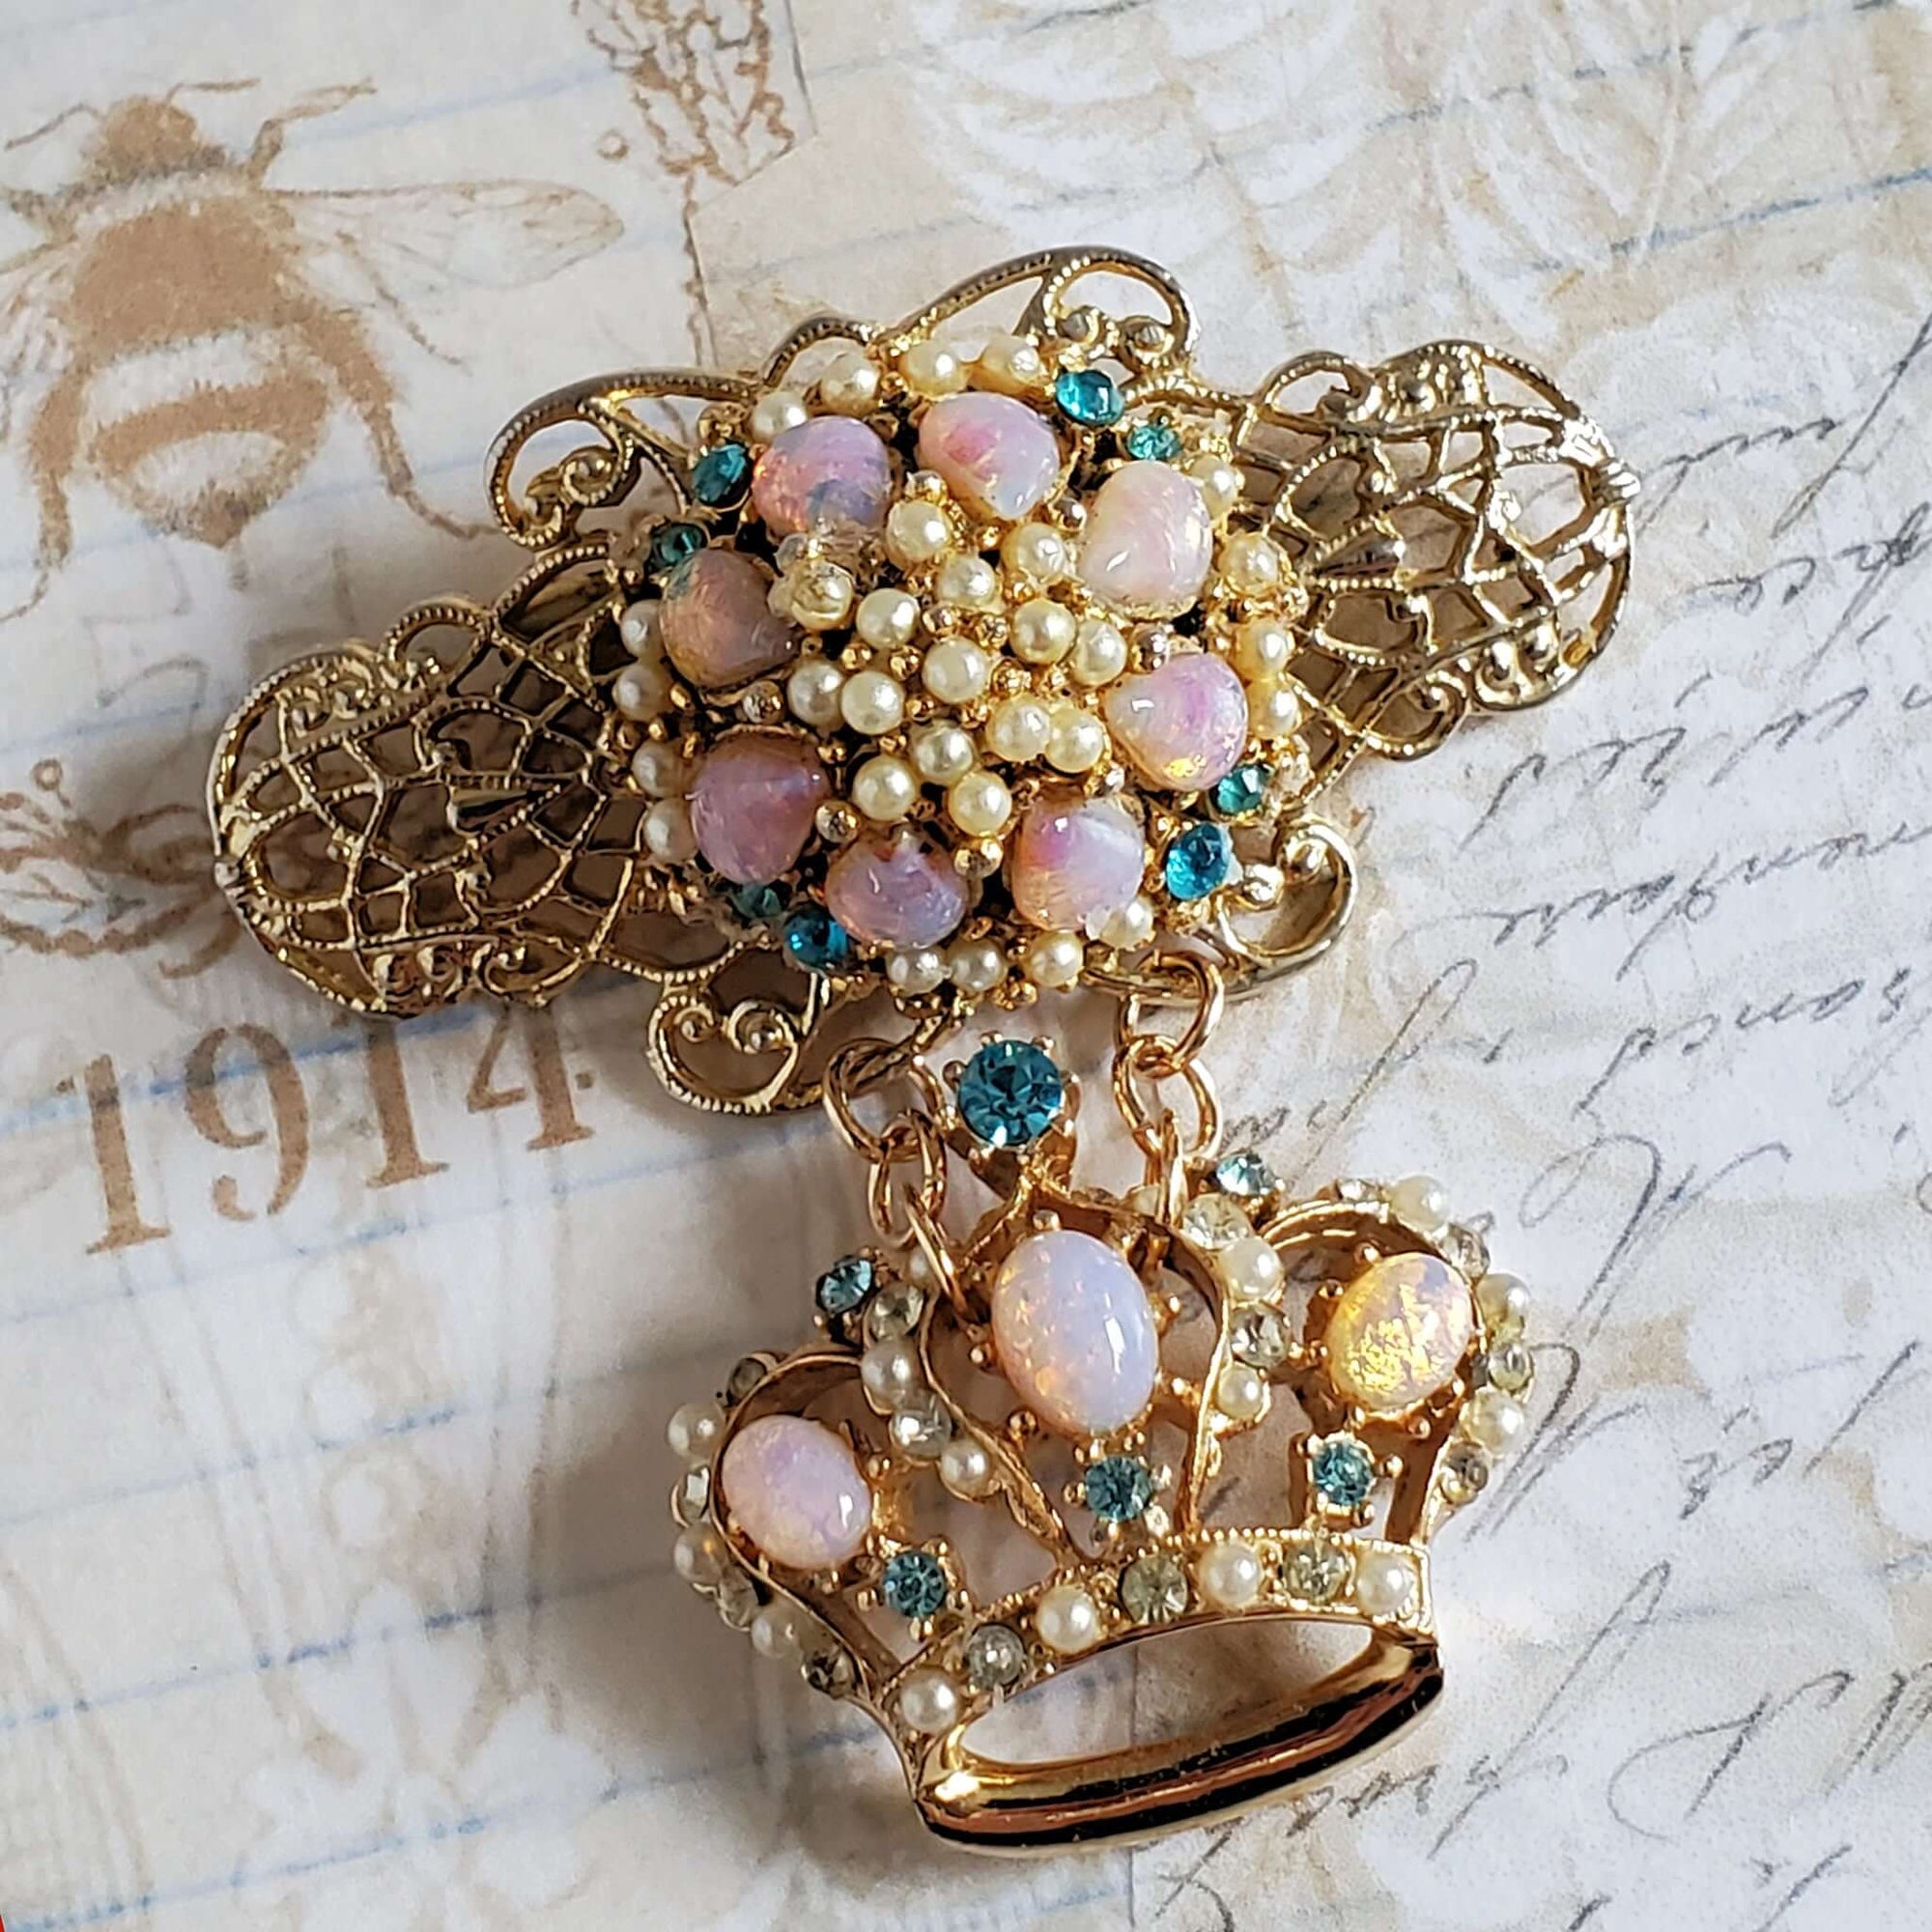 Two tier Brooch with a gold tone filigree setting with an imitation opal, pearl and rhinestone centerpiece. A matching is attached below the upper pin portion.